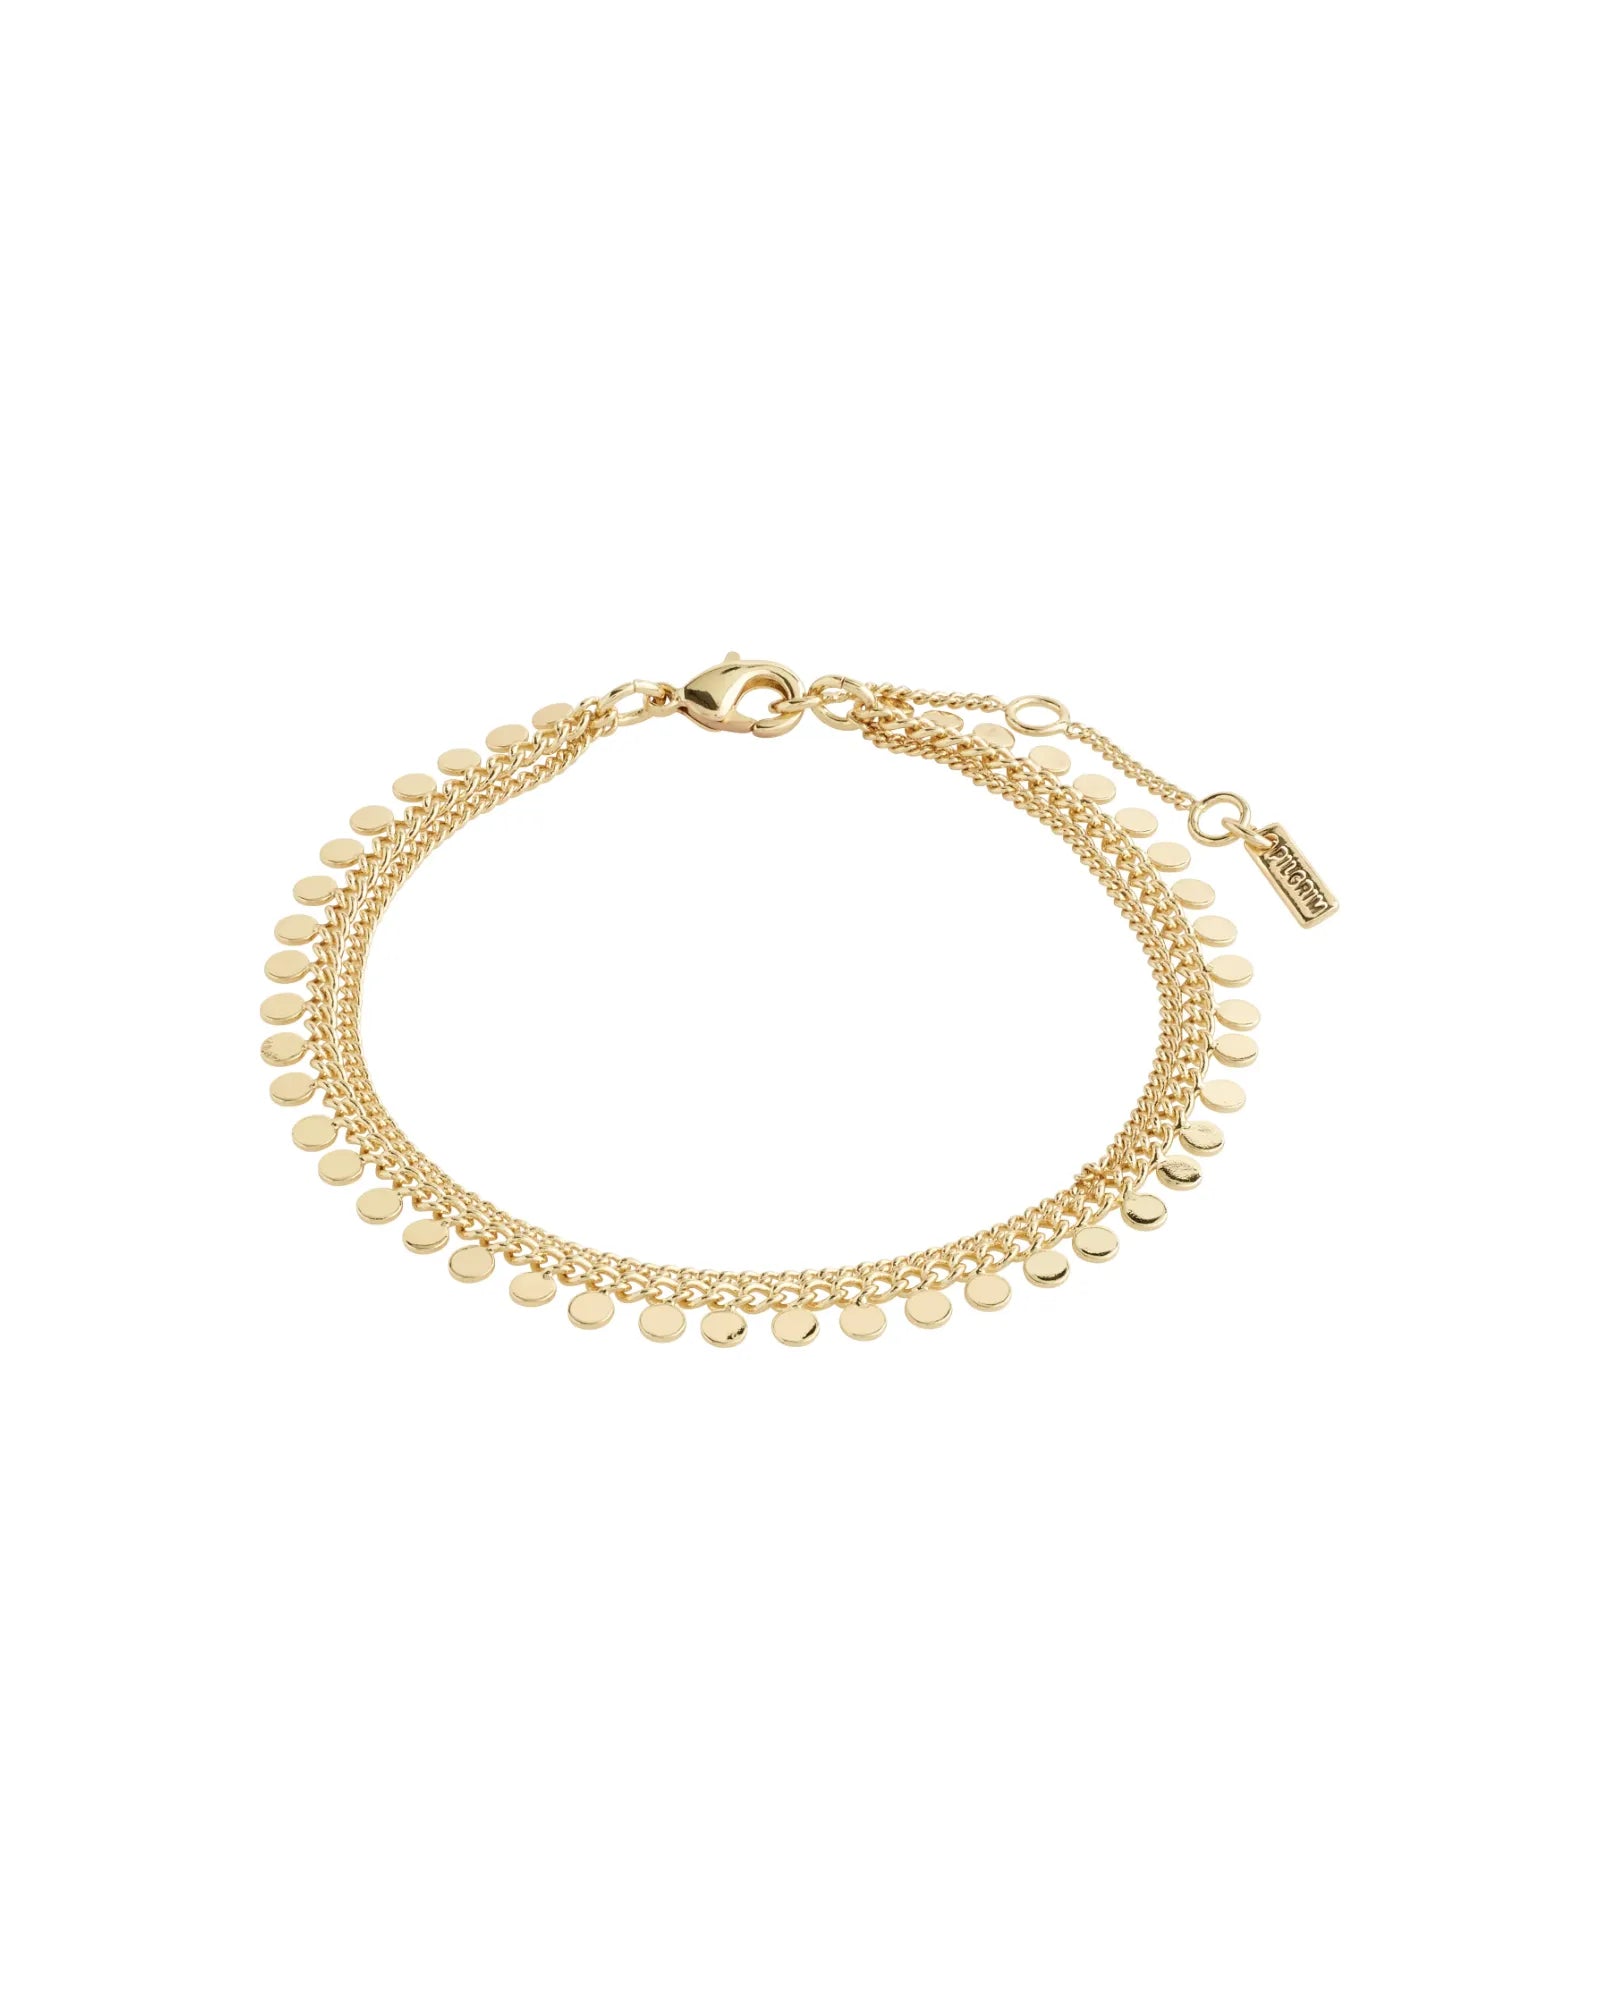 BLOOM Recycled Bracelet - Gold Plated